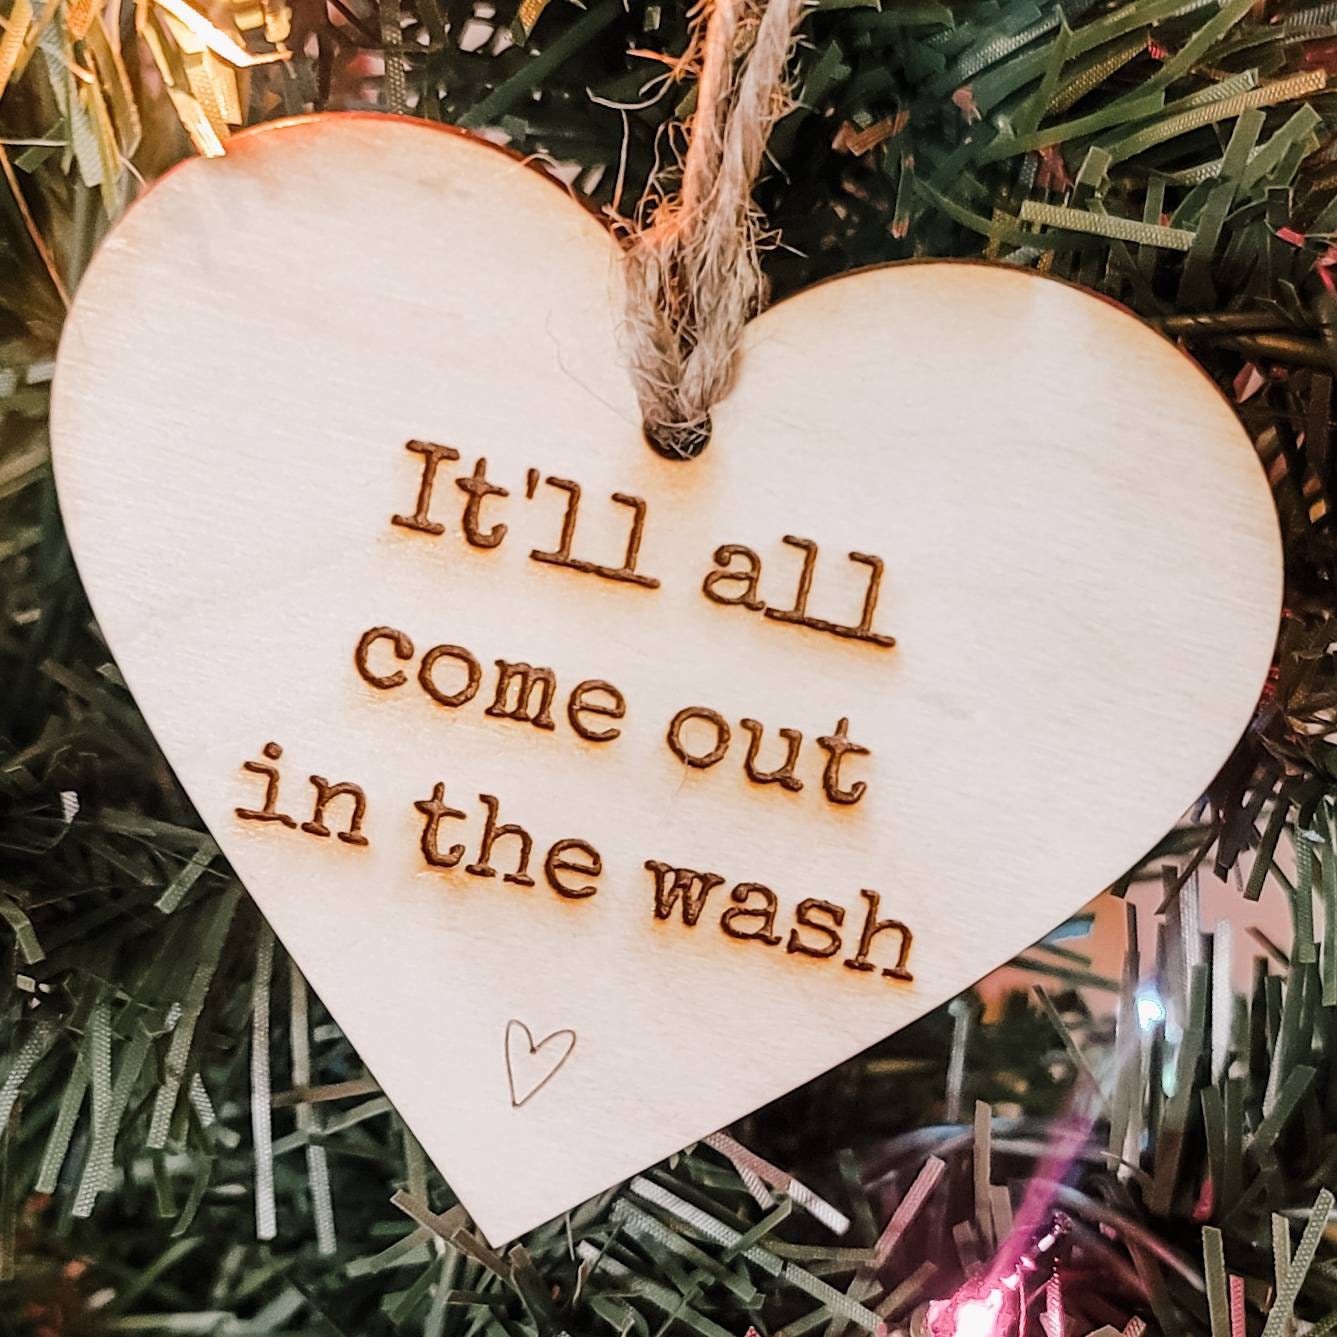 It'll all Comes Out in the Wash Ornament Gift for Friend Gift for Grandma Gift for Friend Southern Sayings